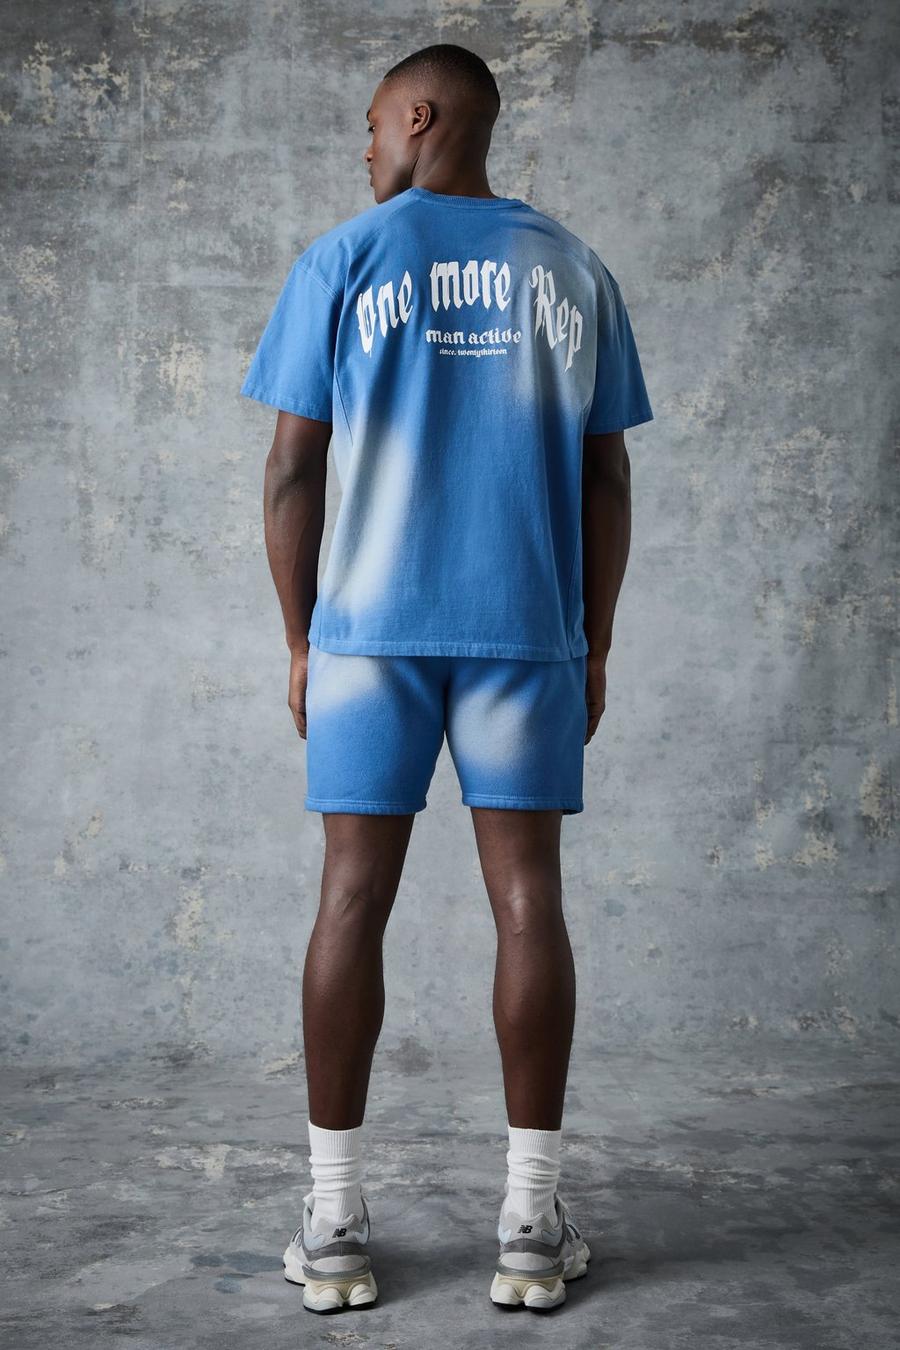 Blue azul Man Active Vintage Washed One More Rep Tee Set